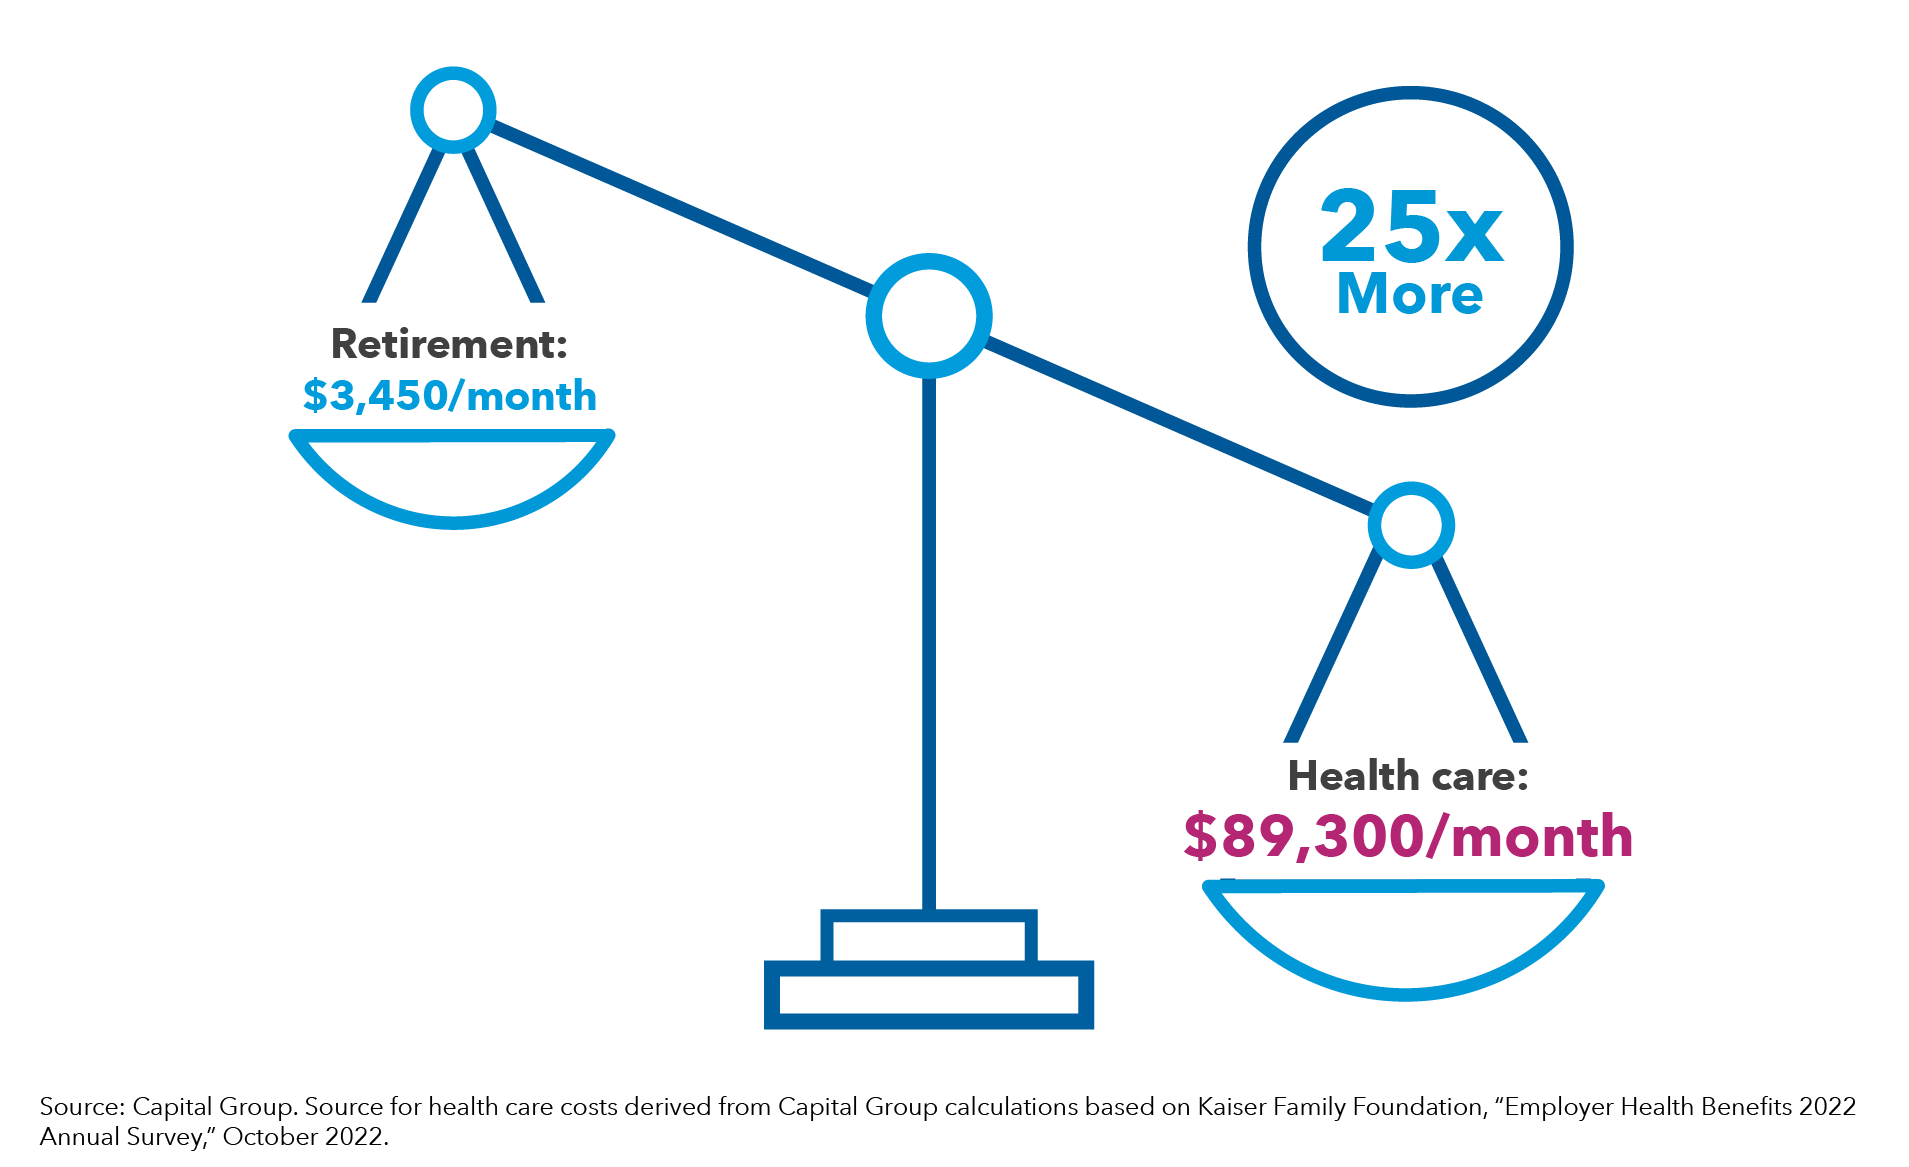 Image shows a scale with “Retirement: $3,450 per month” on the left and “Health care: $89,300 per month” weighted down heavily on the right, with a circle next to it with 25x inside to indicate that health care can cost 25 times more than a 401(k) plan. Source: Capital Group. Source for health care costs derived from Capital Group calculations based on Kaiser Family Foundation, “Employer Health Benefits 2022 Annual Survey,” October 2022.